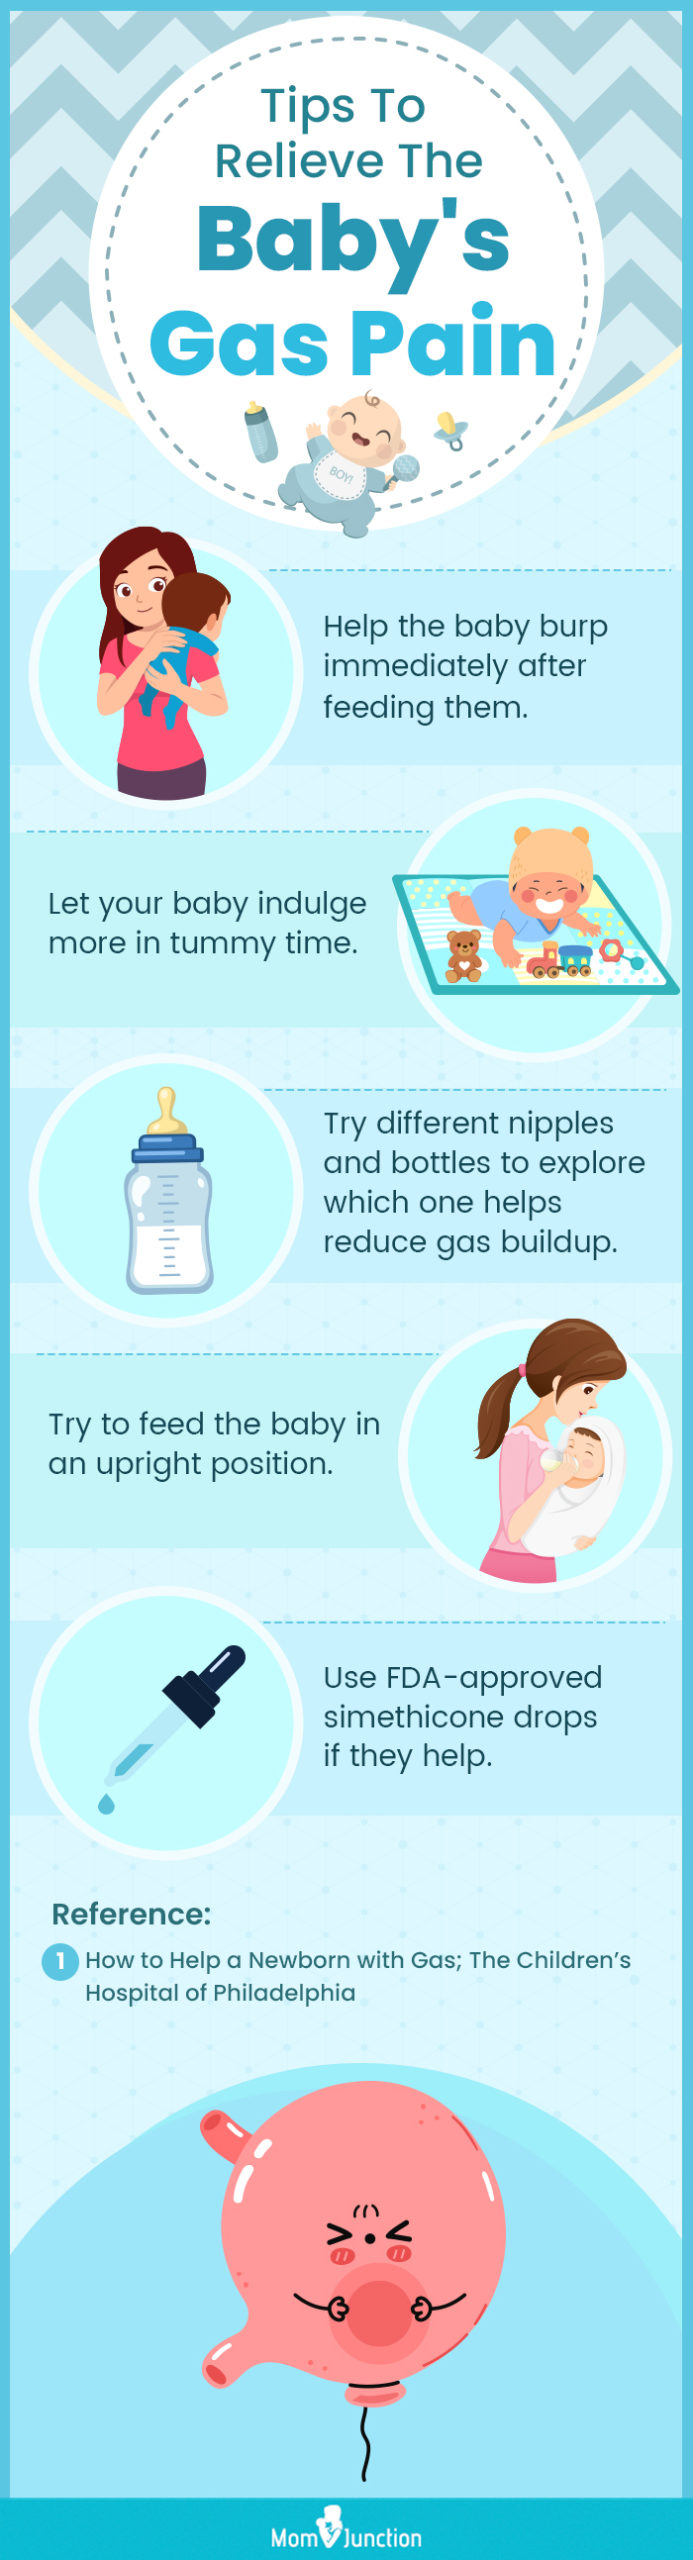 Tips To Relieve The Baby's Gas Pain (infographic)